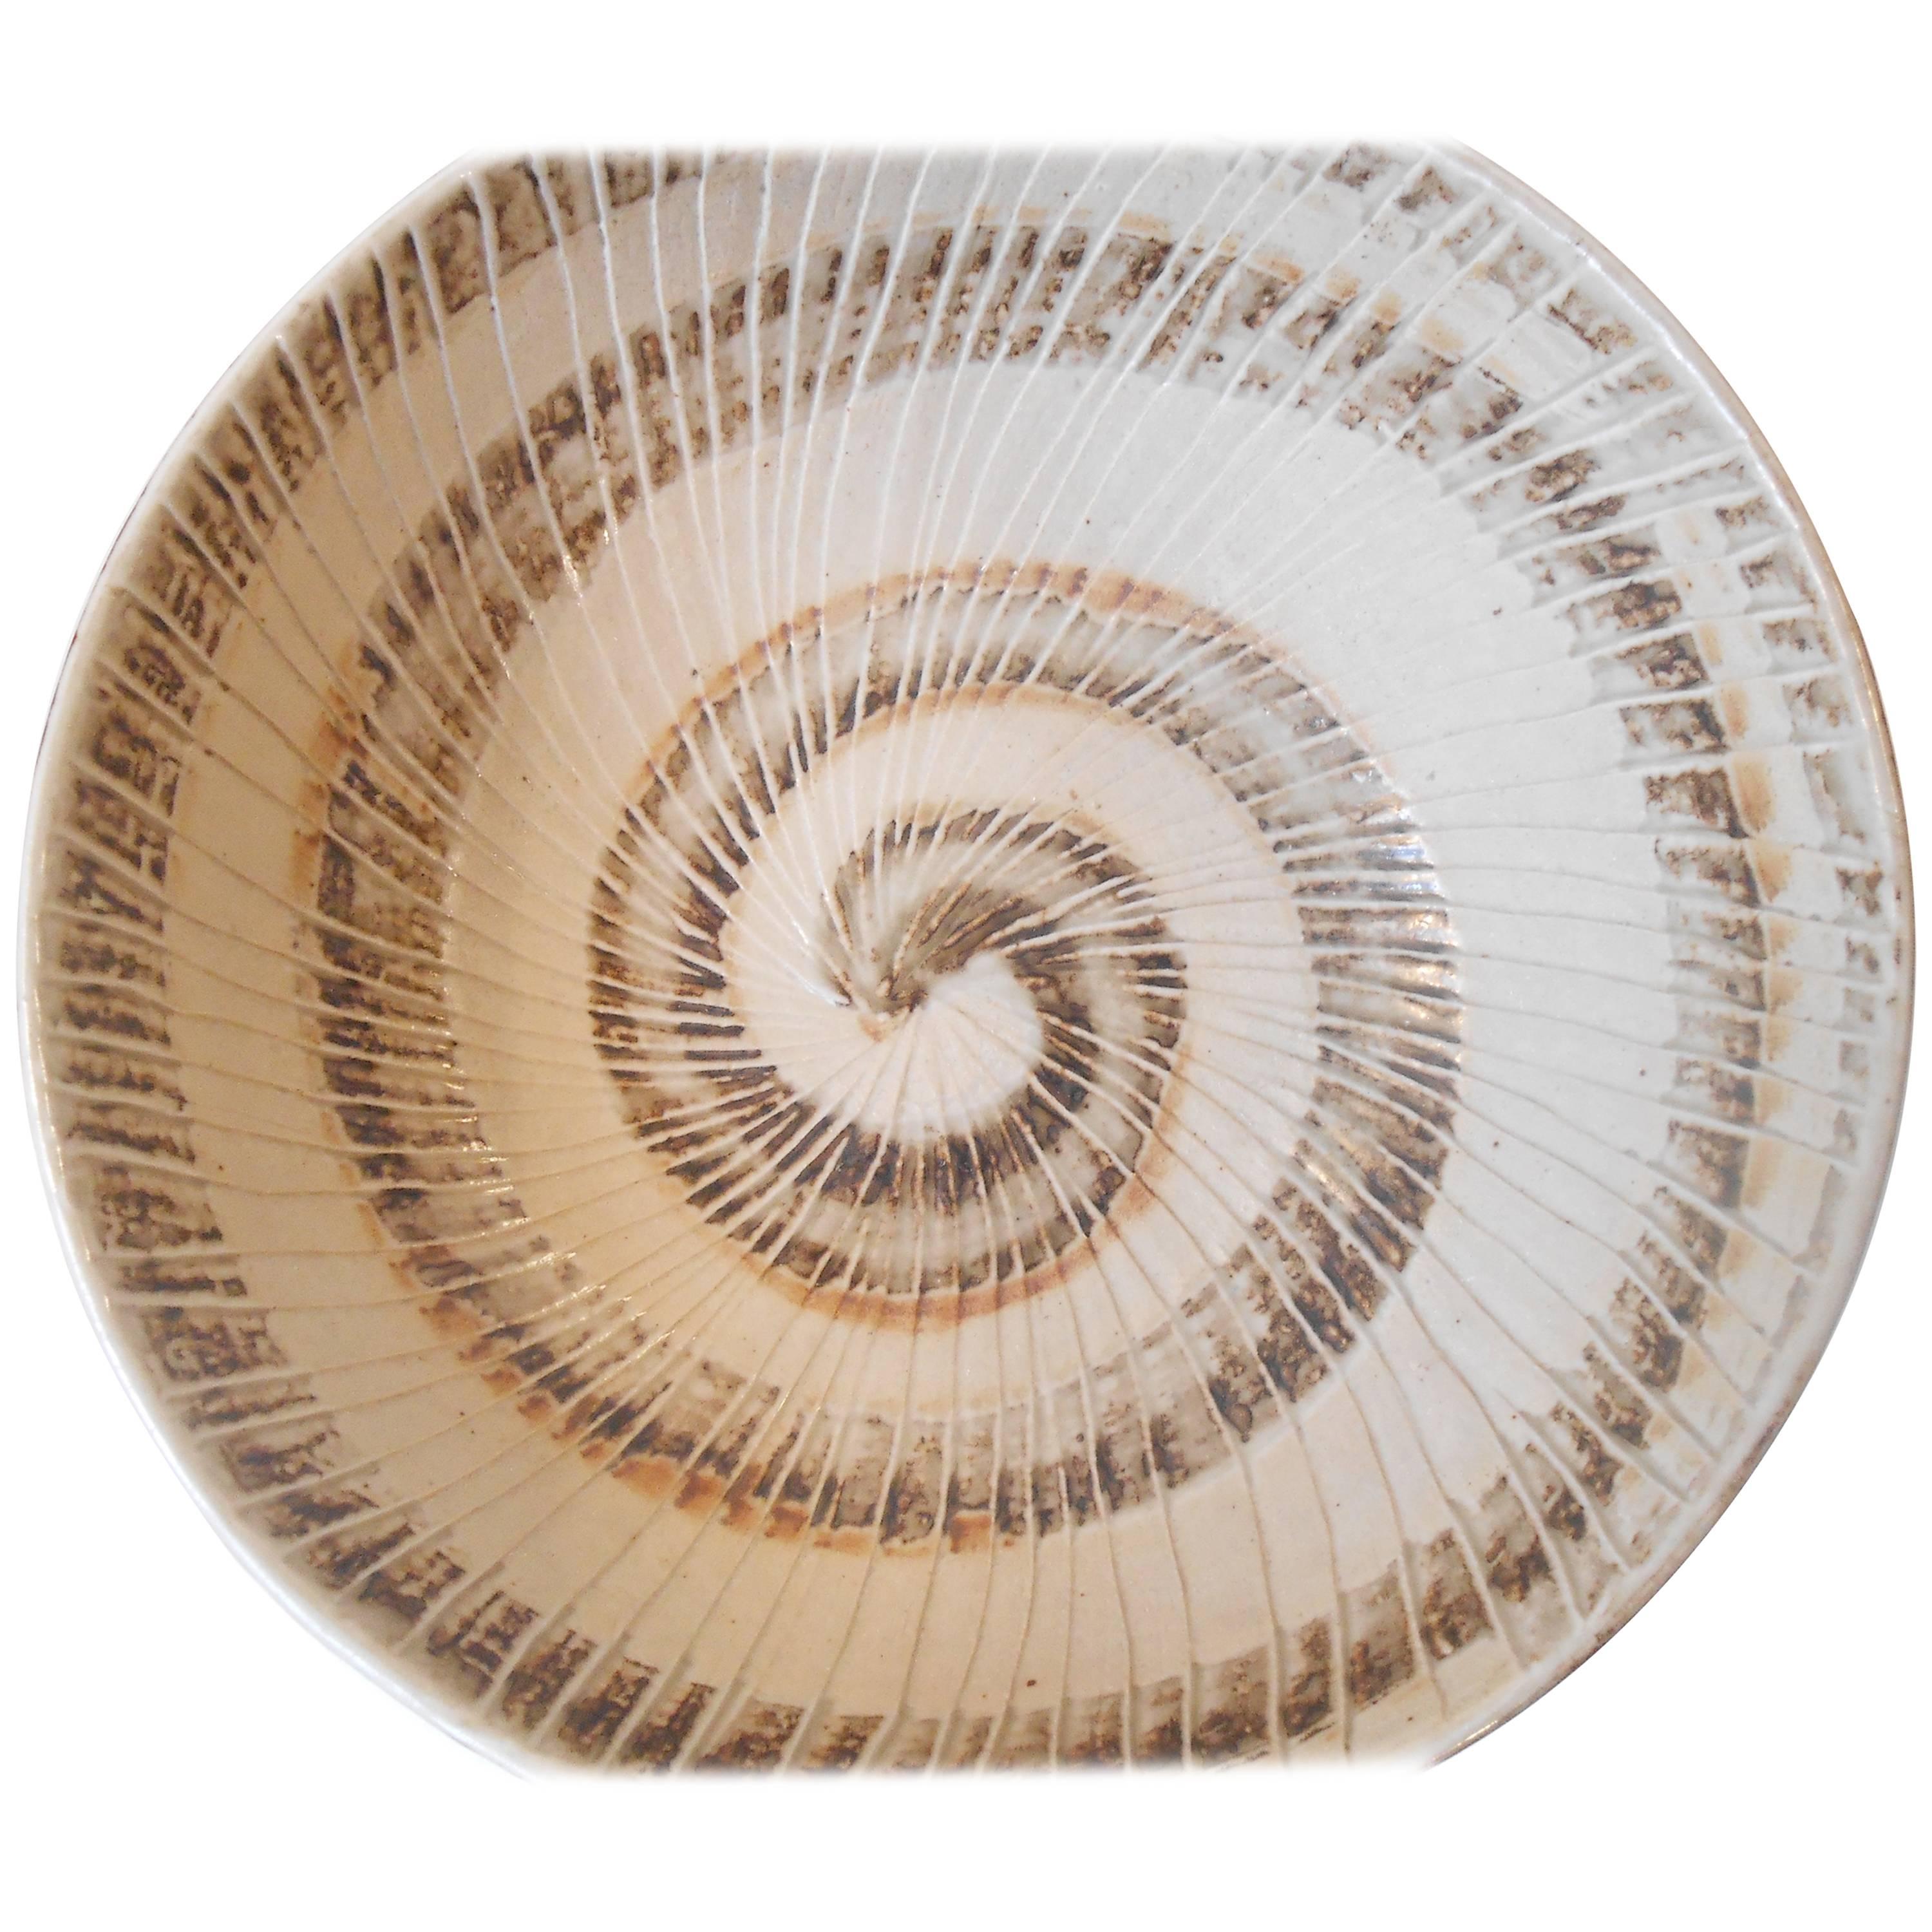 Unique - unika 'Centerpiece' bowl designed by Gerd Bogelund and manufactured under license for Royal Copenhagen, Denmark. Earthy pastel glazes, incised spiral motif' composes the interior of the bowl. The exterior displays his distinct approach